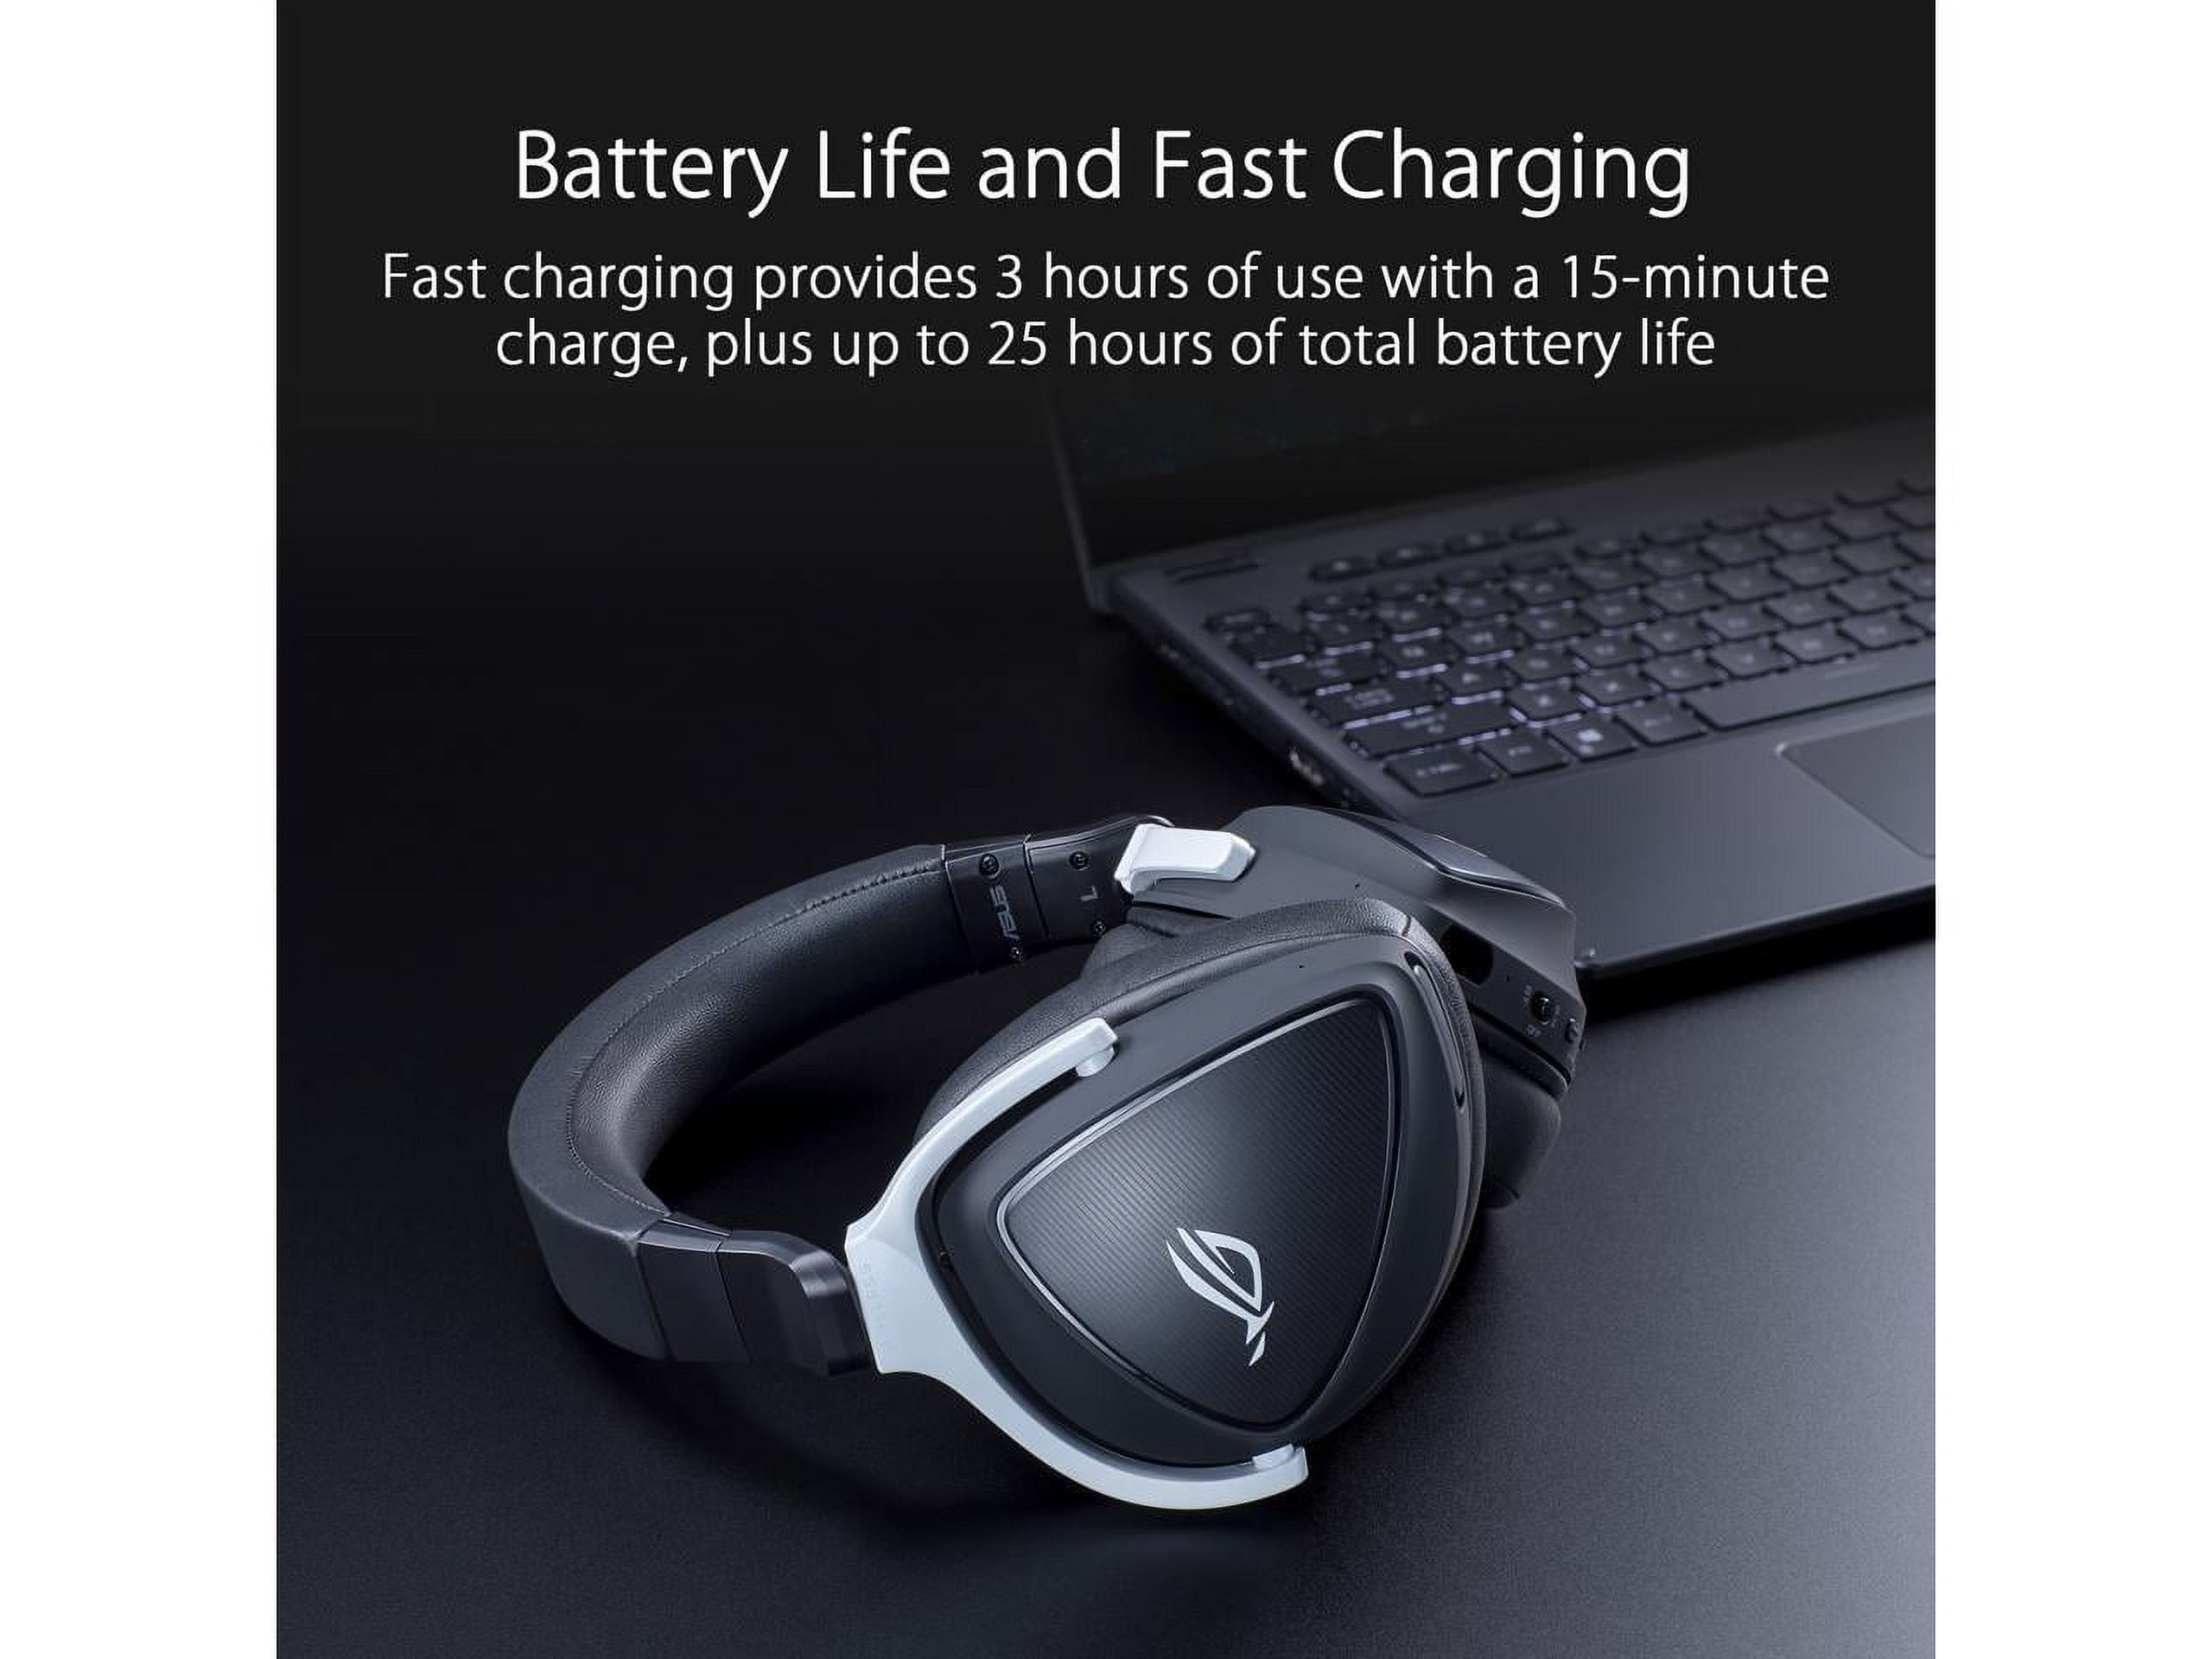 Mobile S USB-C, PS5, PS4, Wireless (AI Device) ASUS Lightweight, ROG Sound, For Surround Gaming 7.1 Mic, Blac Drivers, Headset Bluetooth, Switch, - Low-latency, 50mm PC, Delta Beamforming Mac, 2.4GHz,